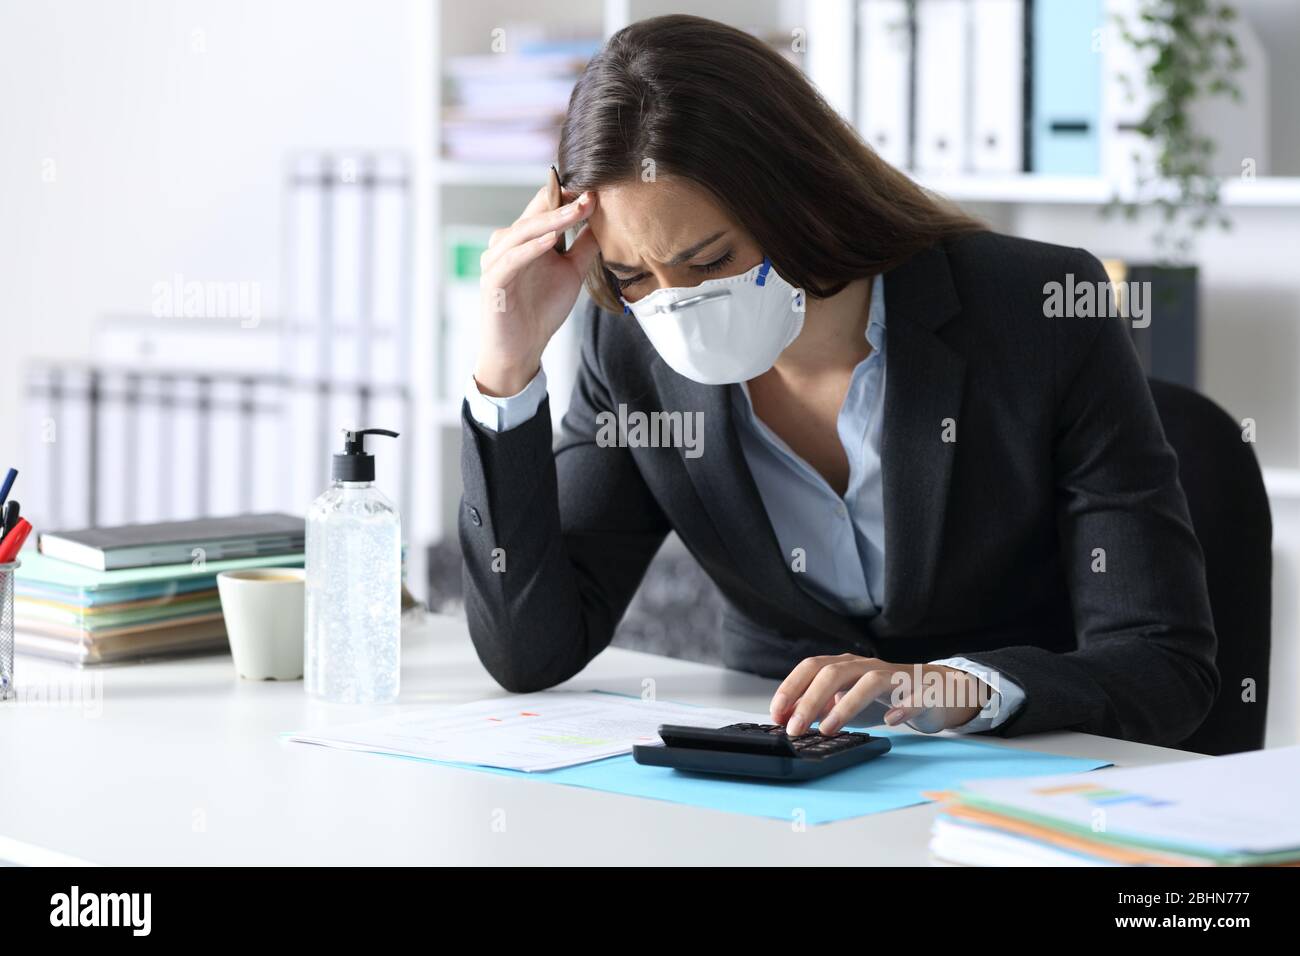 Worried bookkeeper with protective mask looking at calculator on a desk at the office Stock Photo